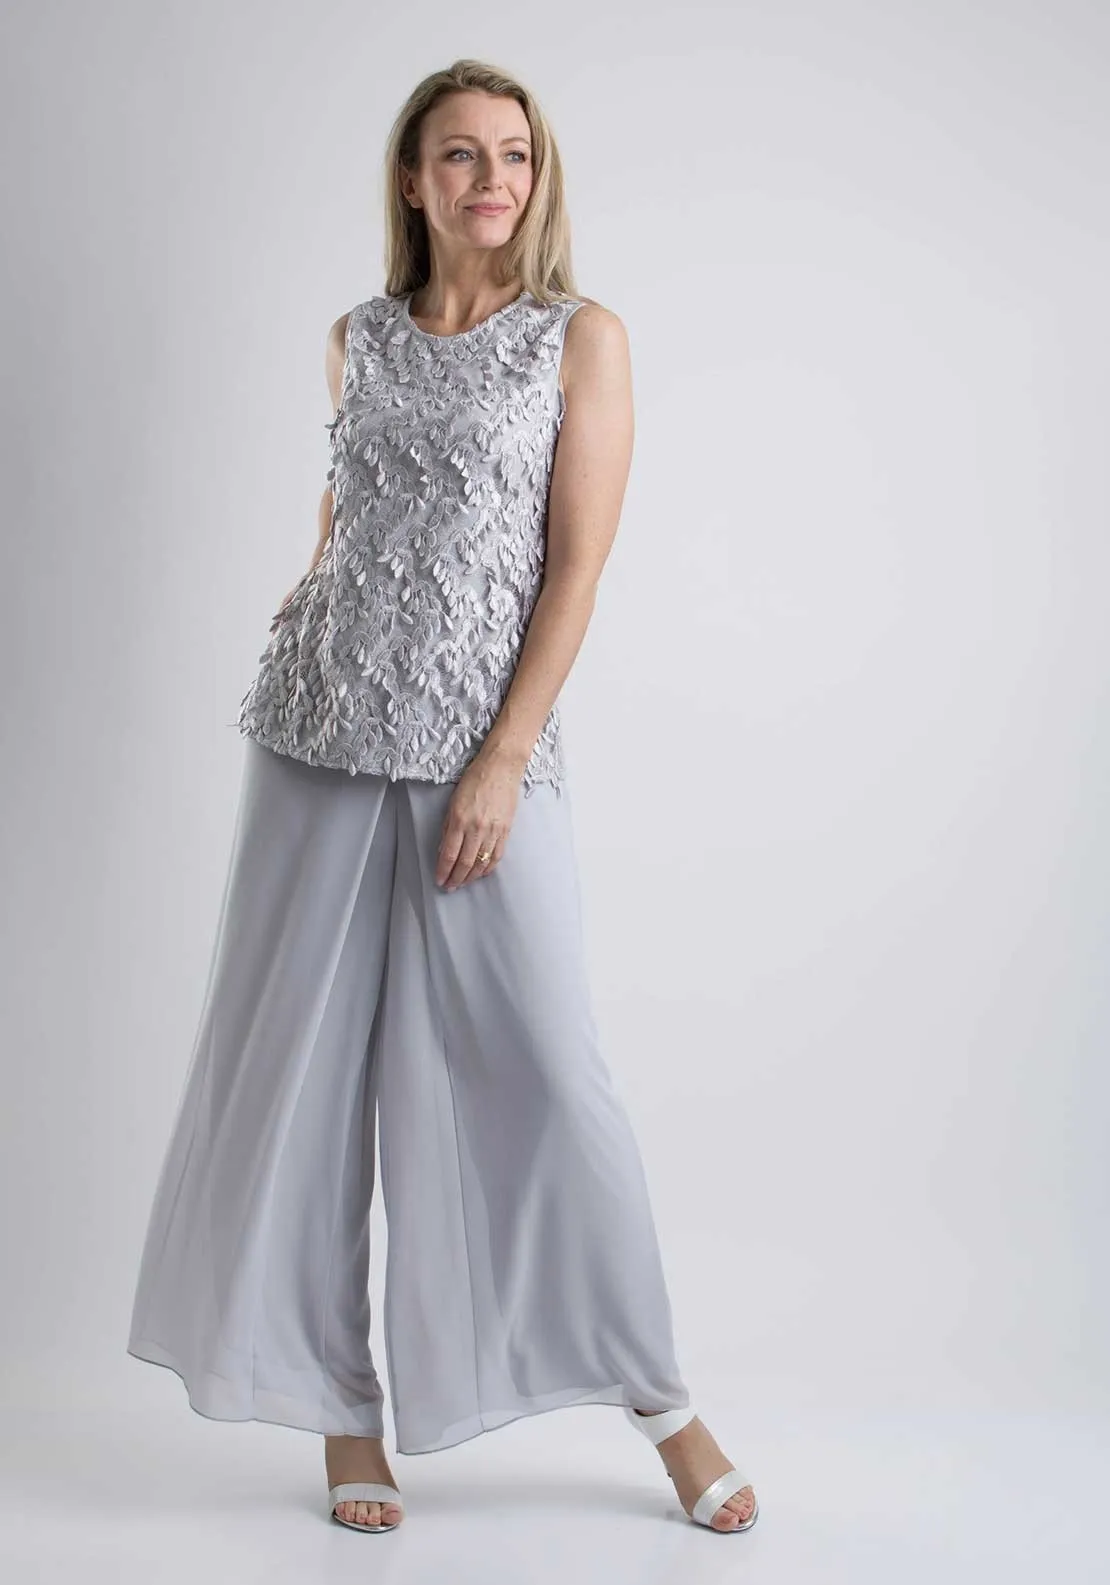 Wedding Pant Suits For Women Evening Gown Chiffon Silver Shiny